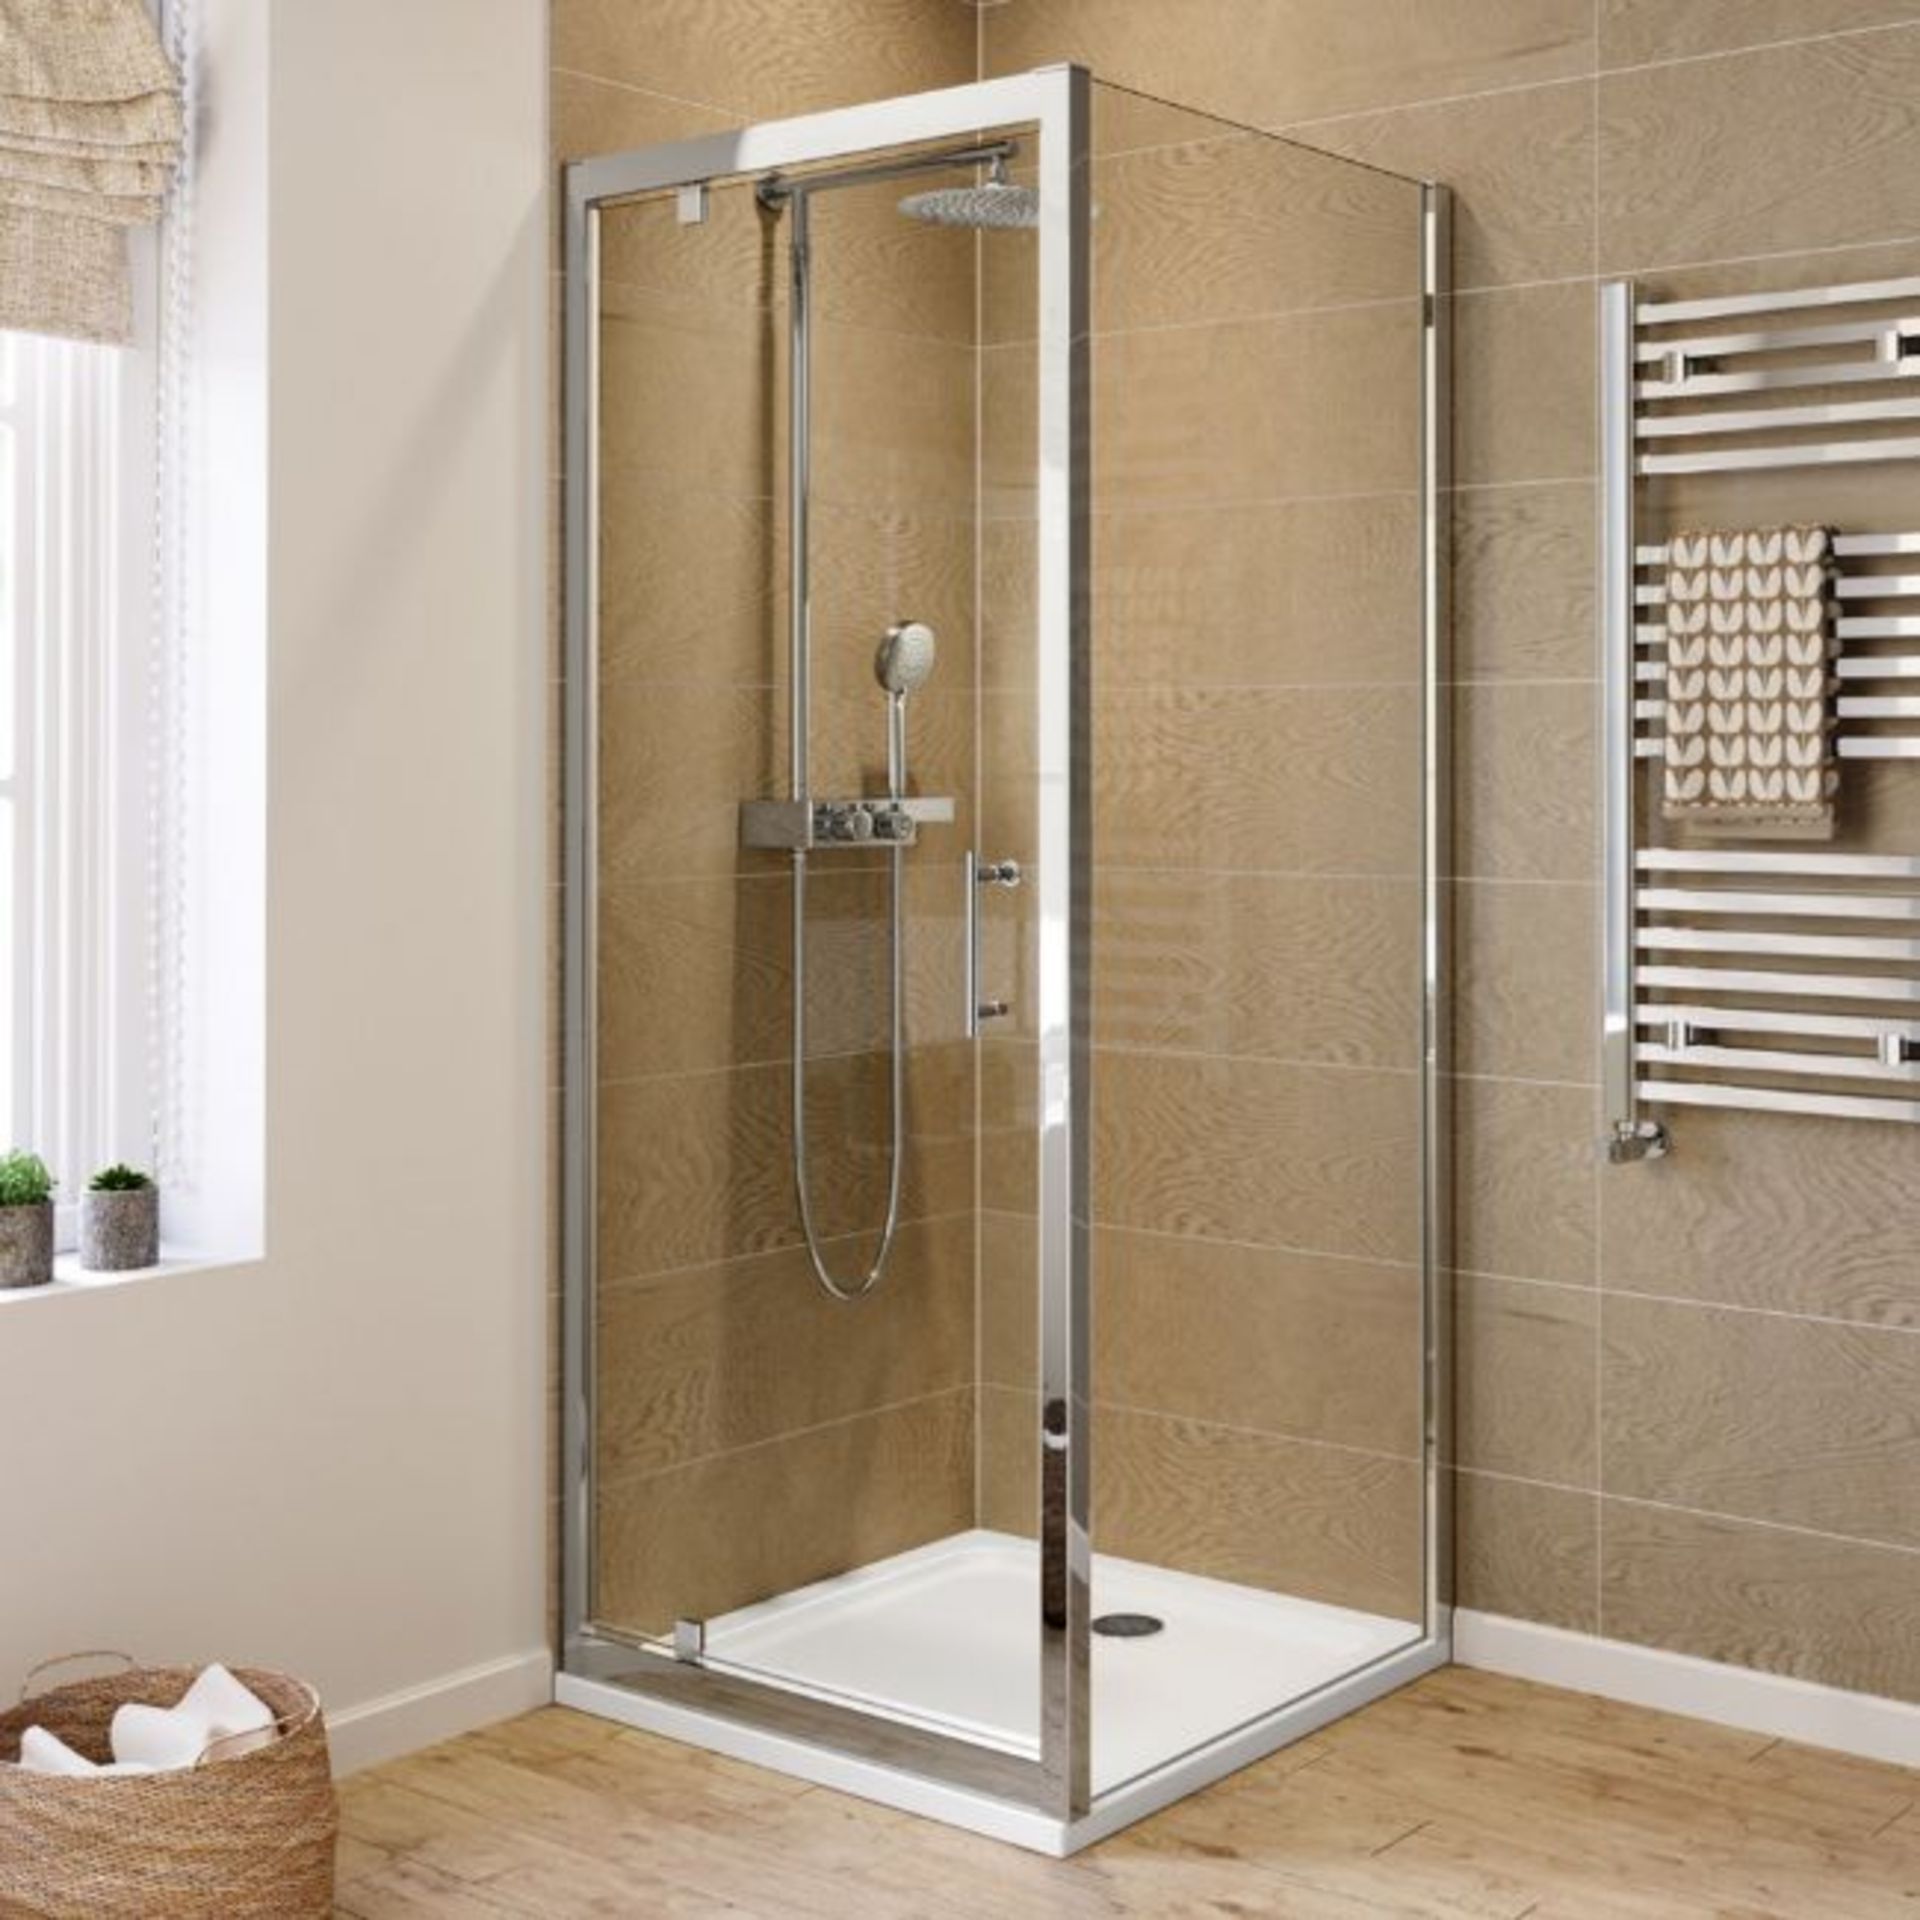 New Twyfords 800 x 800mm - 6mm - Elements Pivot Door Shower enclosure RRP £330.99. Of4100Cp+Of...